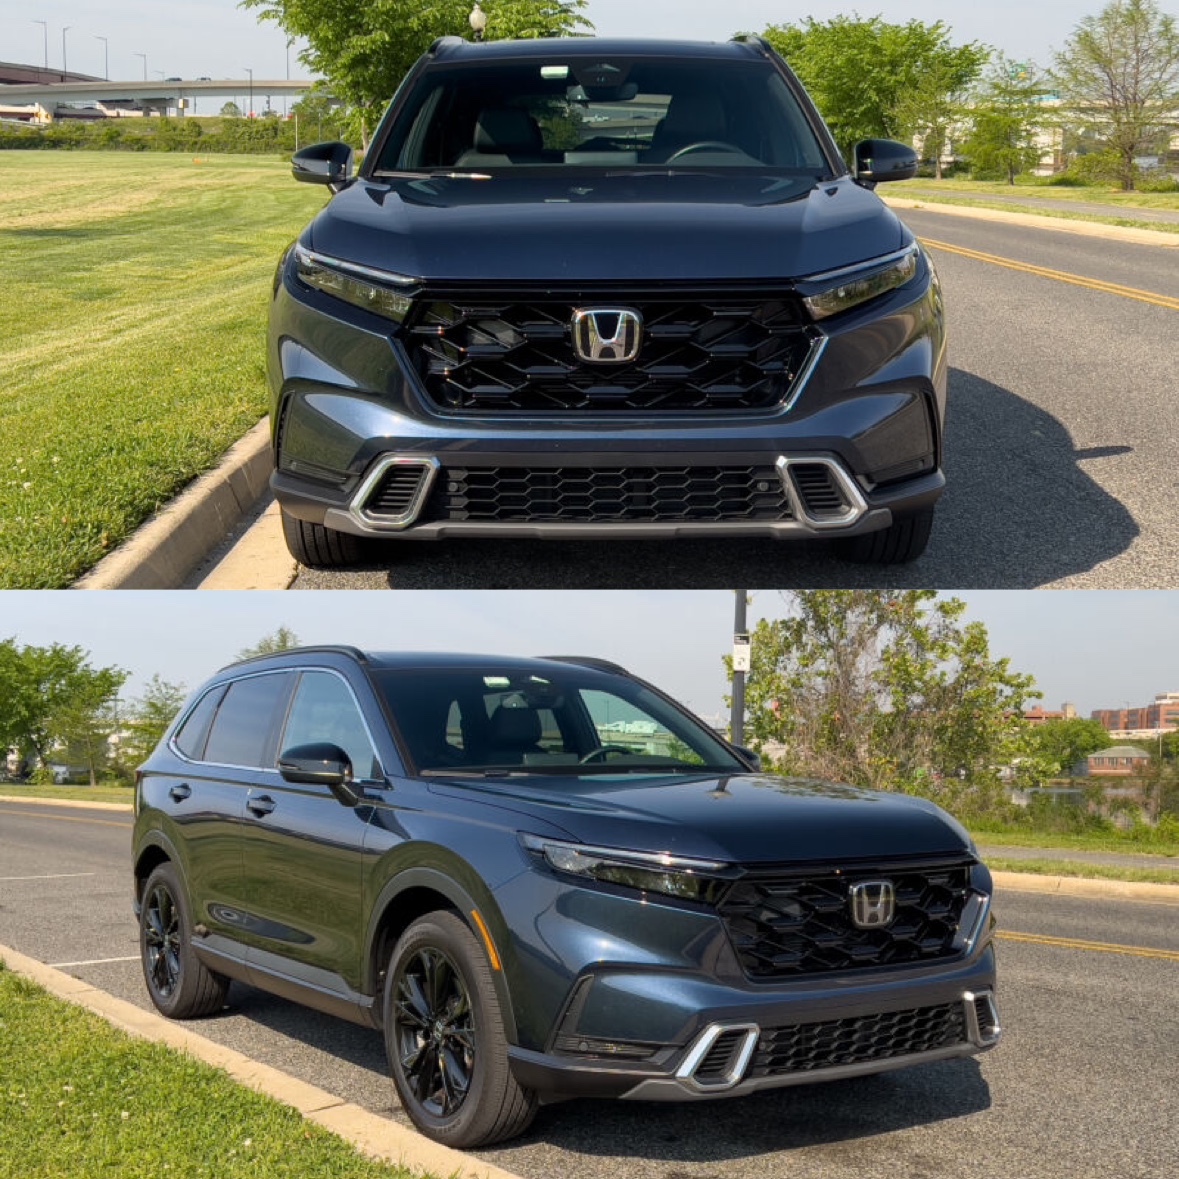 🎉🚙 Now available in stock - the 2023 Honda CR-V Hybrid Sport! 🏅 Named a '10 Best' by Car and Driver, this hybrid gives you more. Experience distinctive sport styling, a responsive 204-horsepower powertrain, and impressive fuel efficiency!

🌐 AtlanticHonda.com